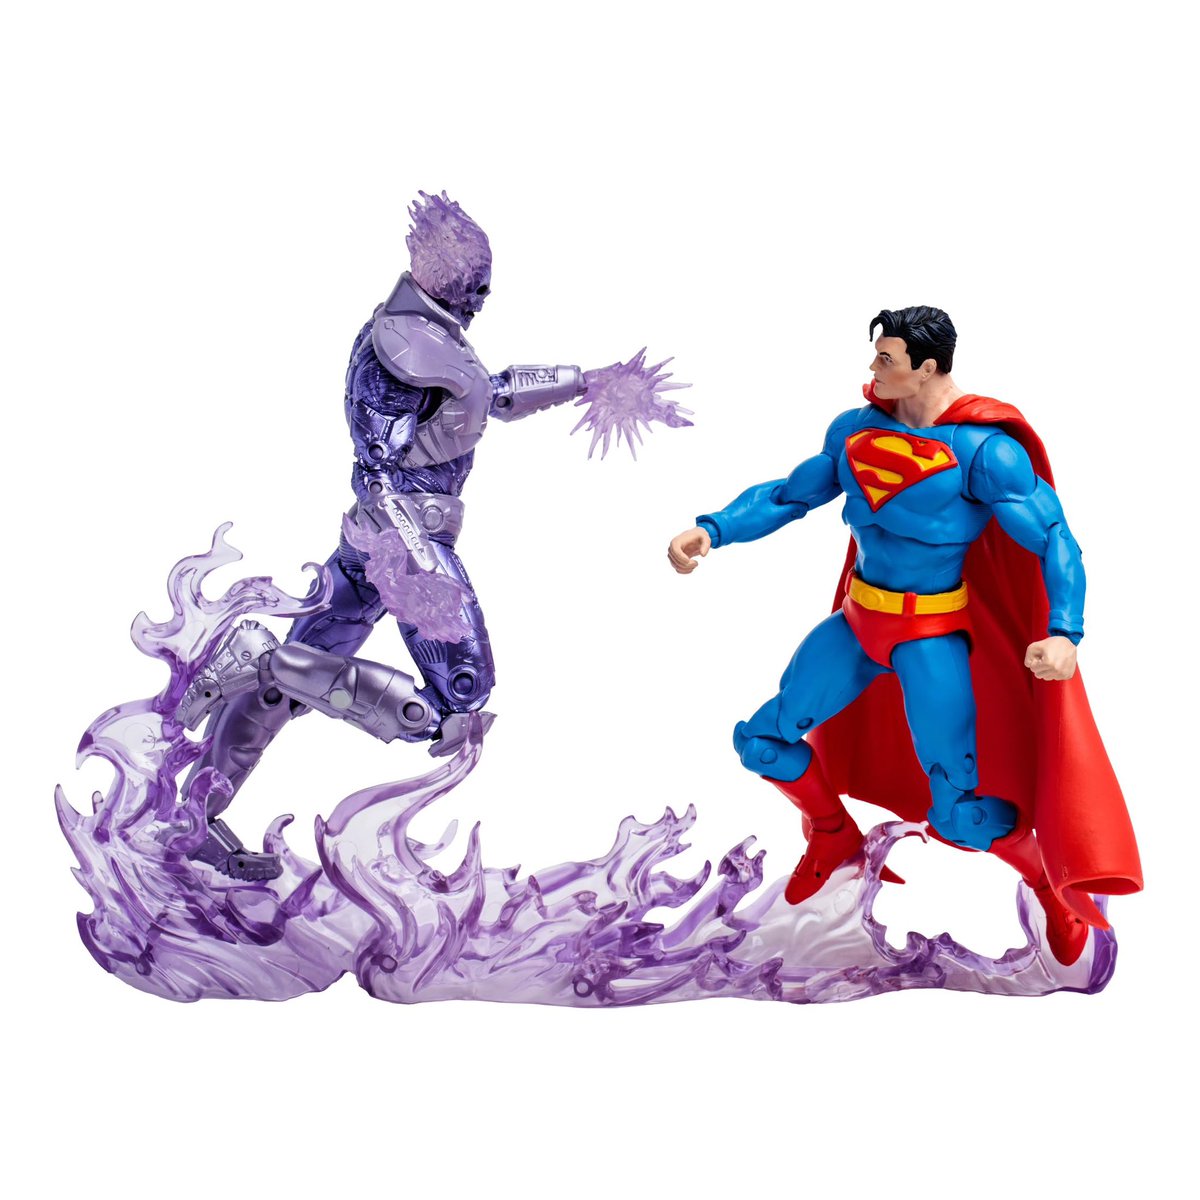 New Amazon exclusive McFarlane Toys, Gold Label Atomic Skull vs. Superman 2-Pack is available for preorder!

amazon.com/dp/B0BXBHF1Y2?…

#ad #DCComics #AtomicSkull #Superman